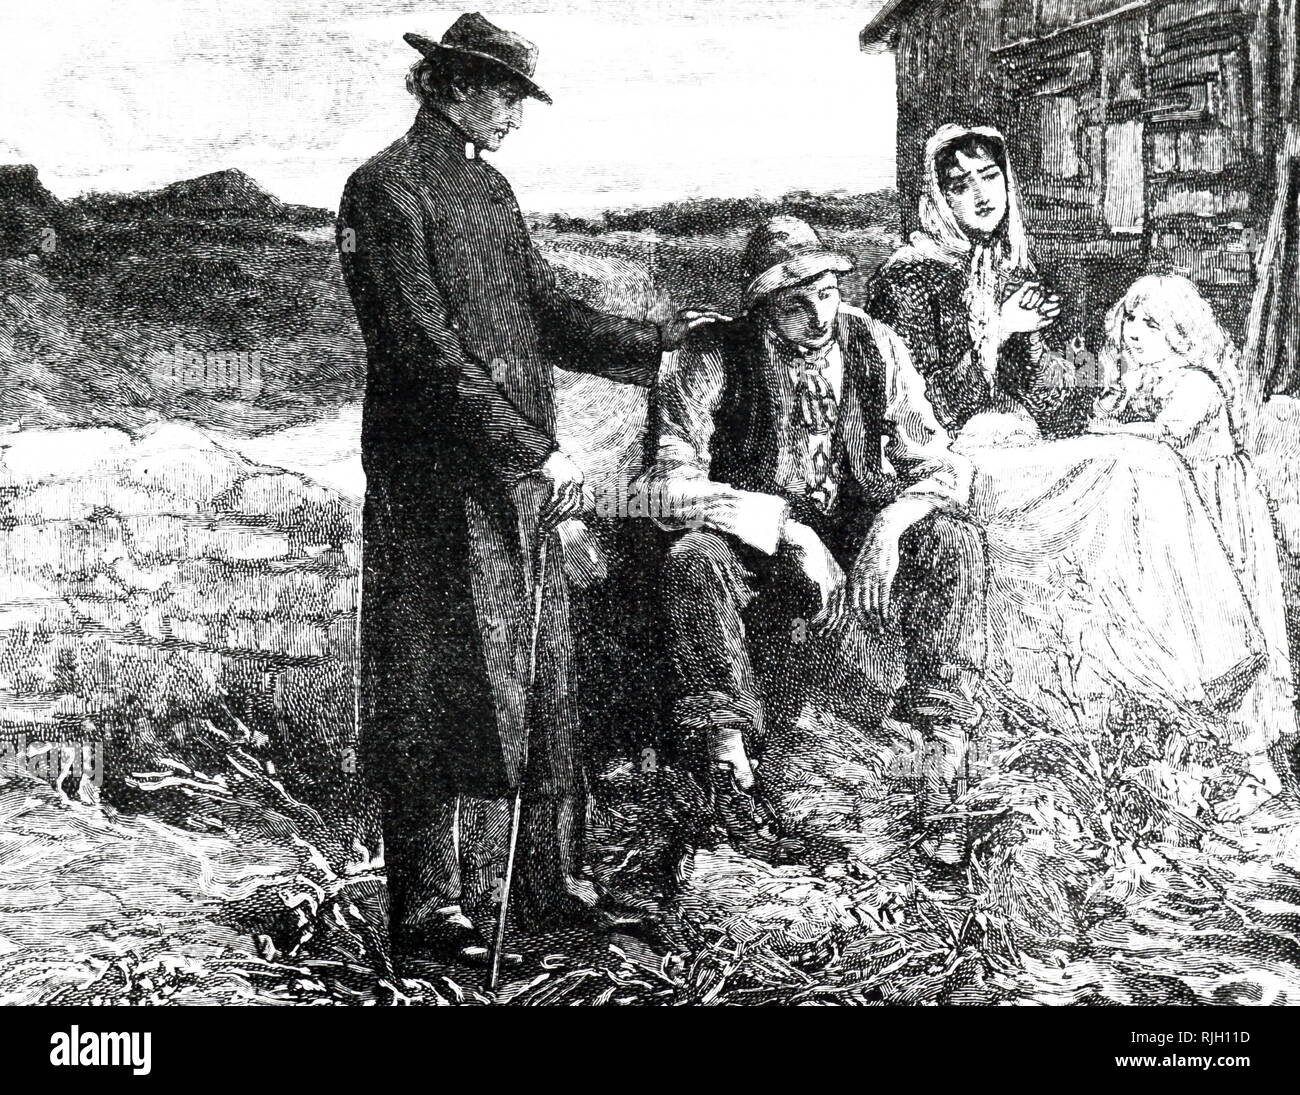 An engraving depicting Father Mathew (Theobald Mathew 1790-1856) comforting a starving family during the Irish potato famine of the 1840's. Father Mathew worked unceasingly to relieve the suffering during this time. Stock Photo